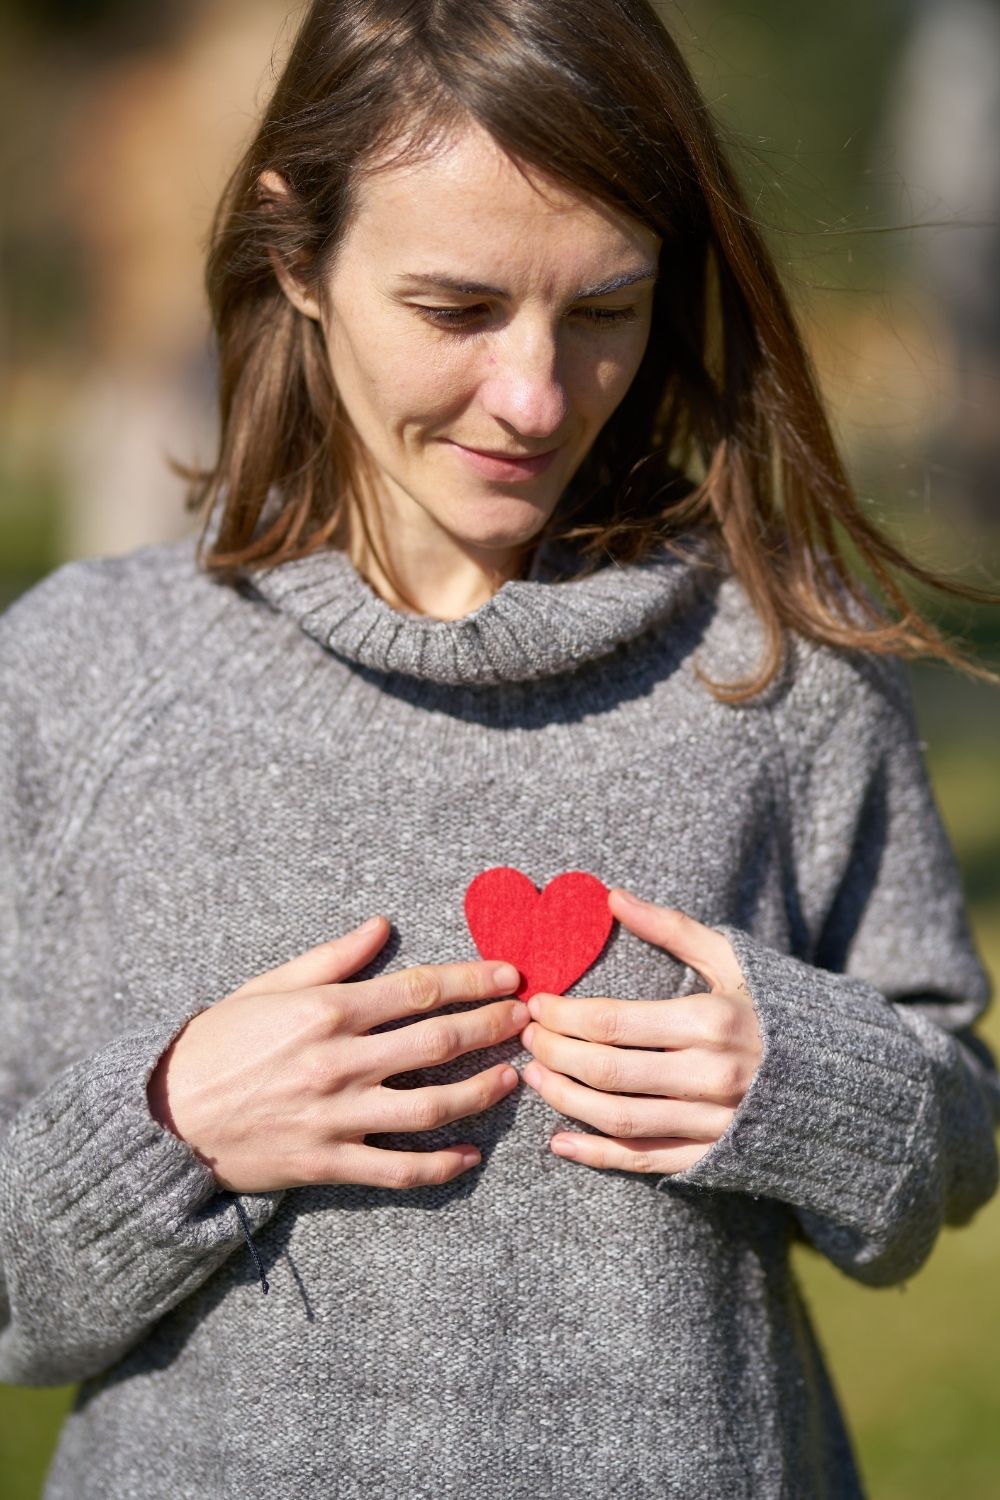 Cardiovascular disease claims more women’s lives than all forms of cancer combined